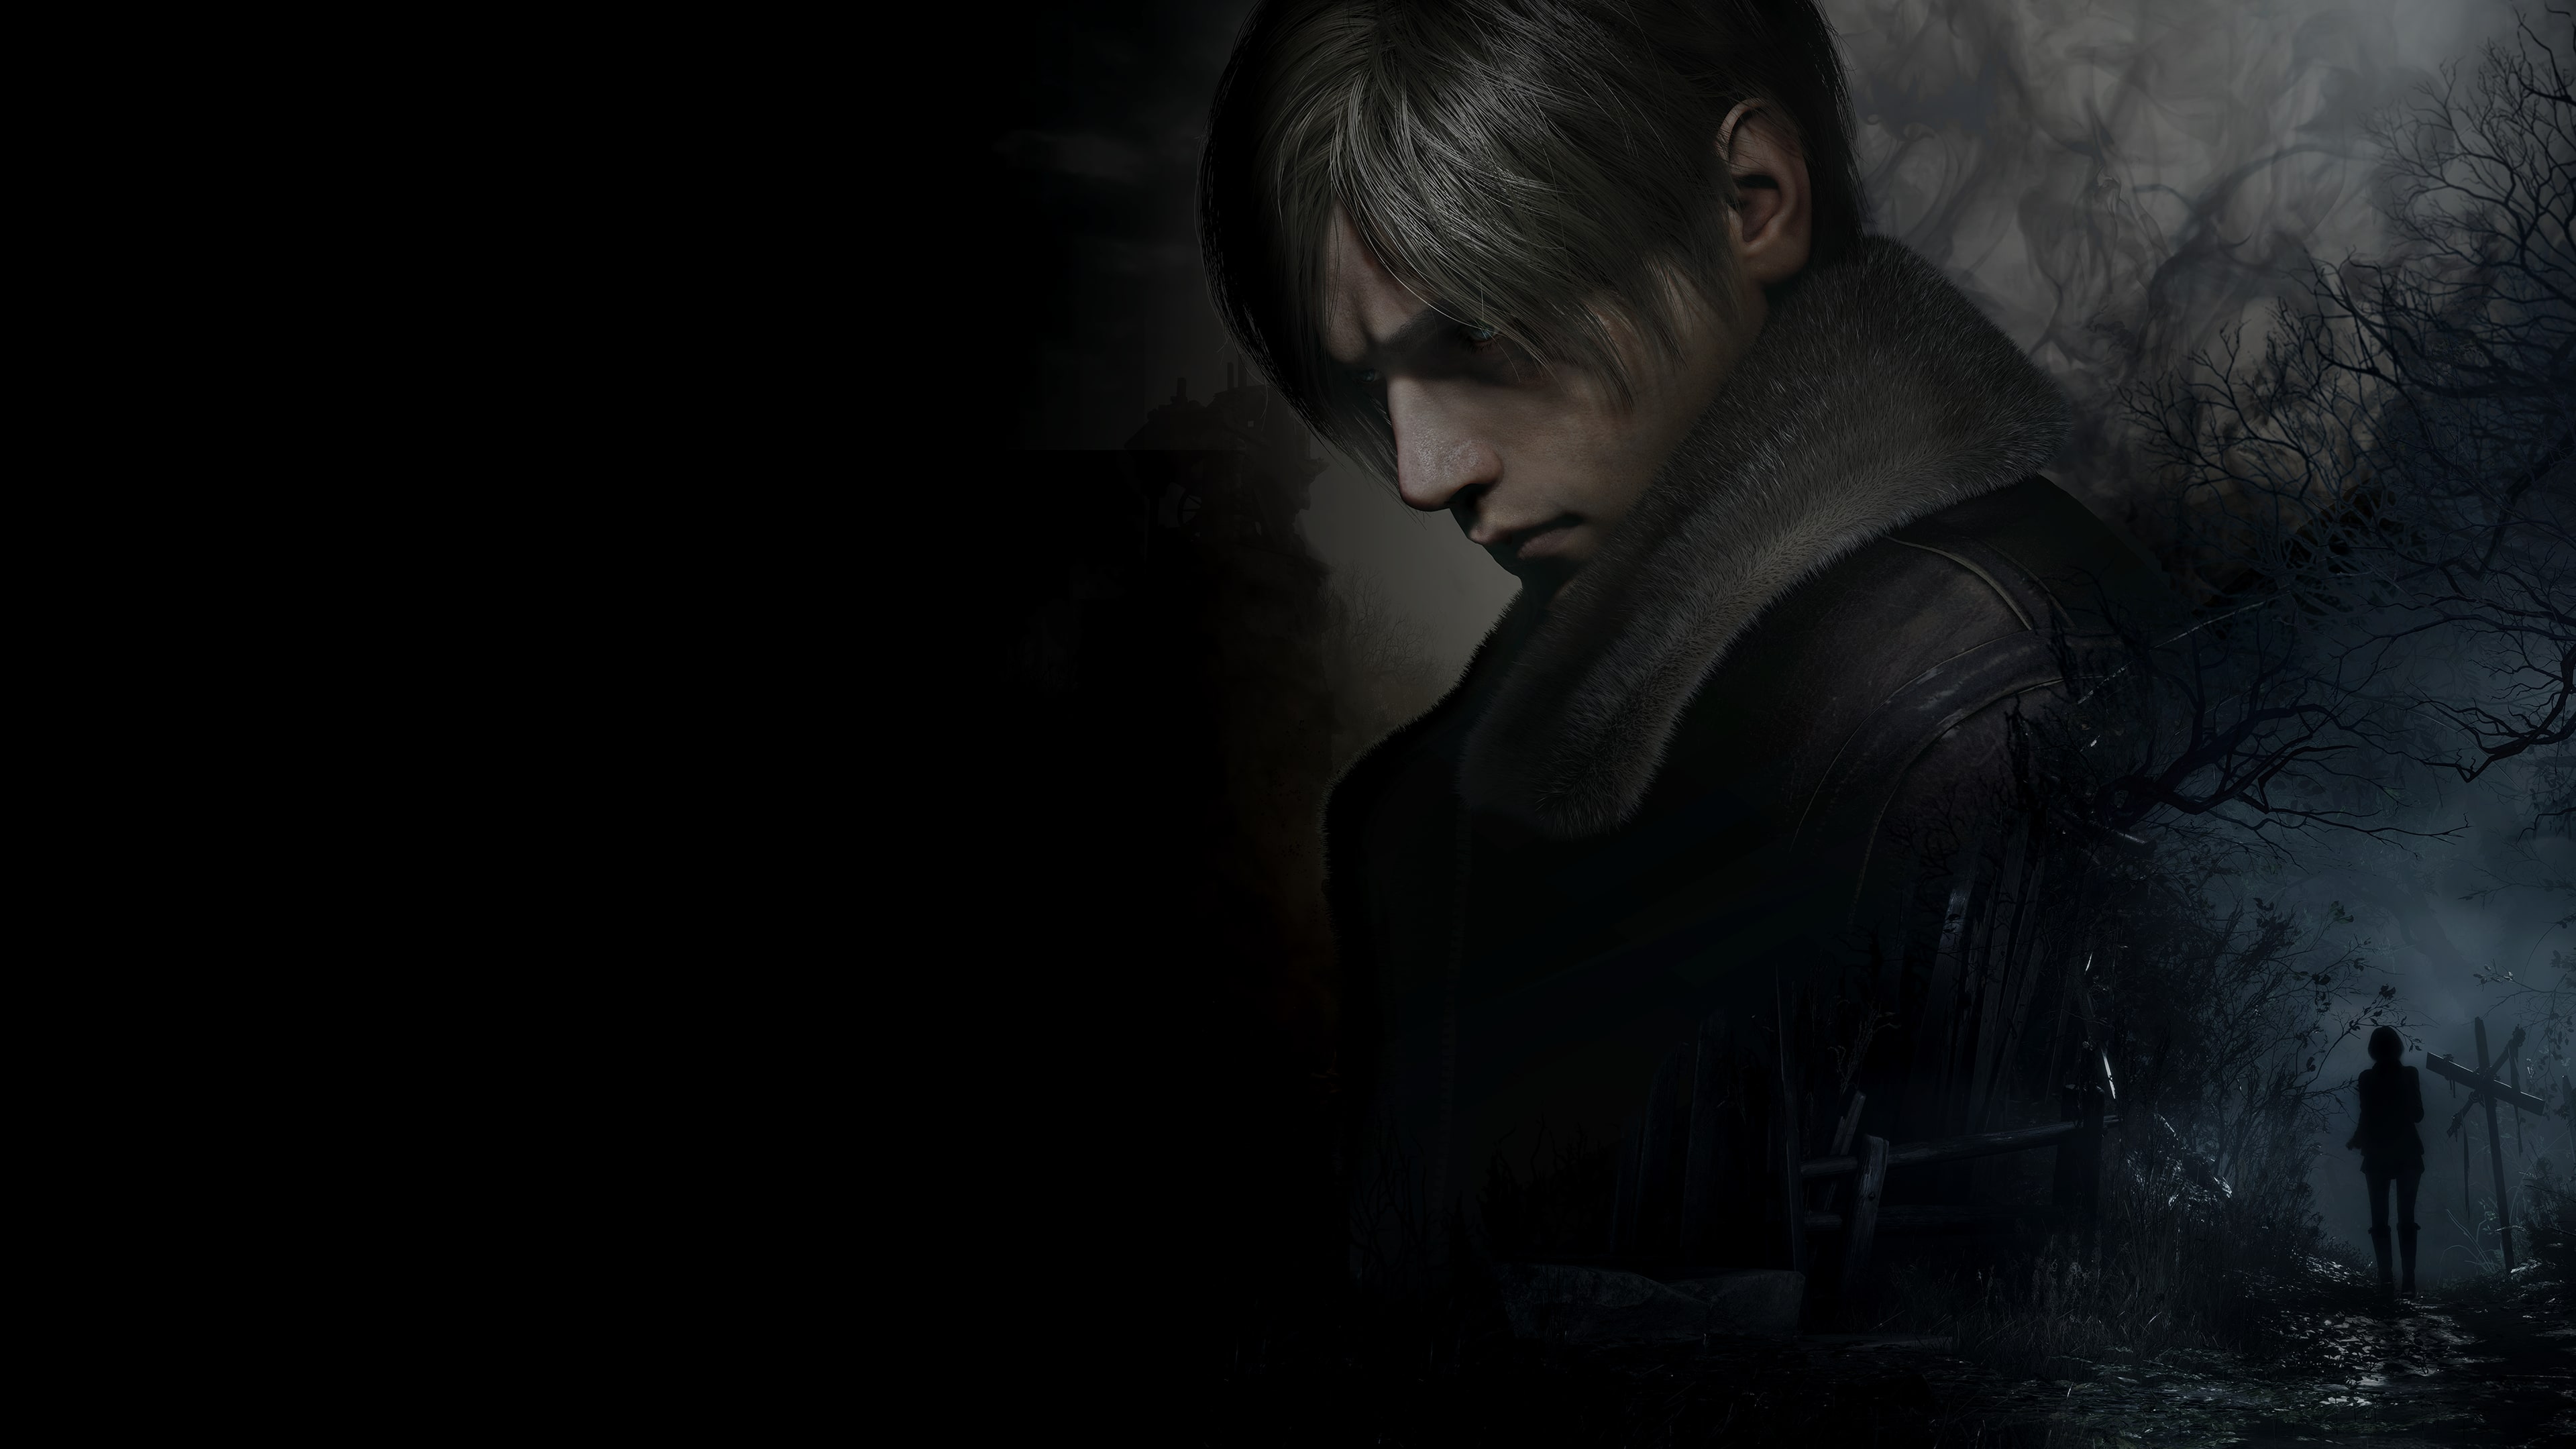 Resident Evil 4 (Simplified Chinese, English, Korean, Japanese, Traditional Chinese)